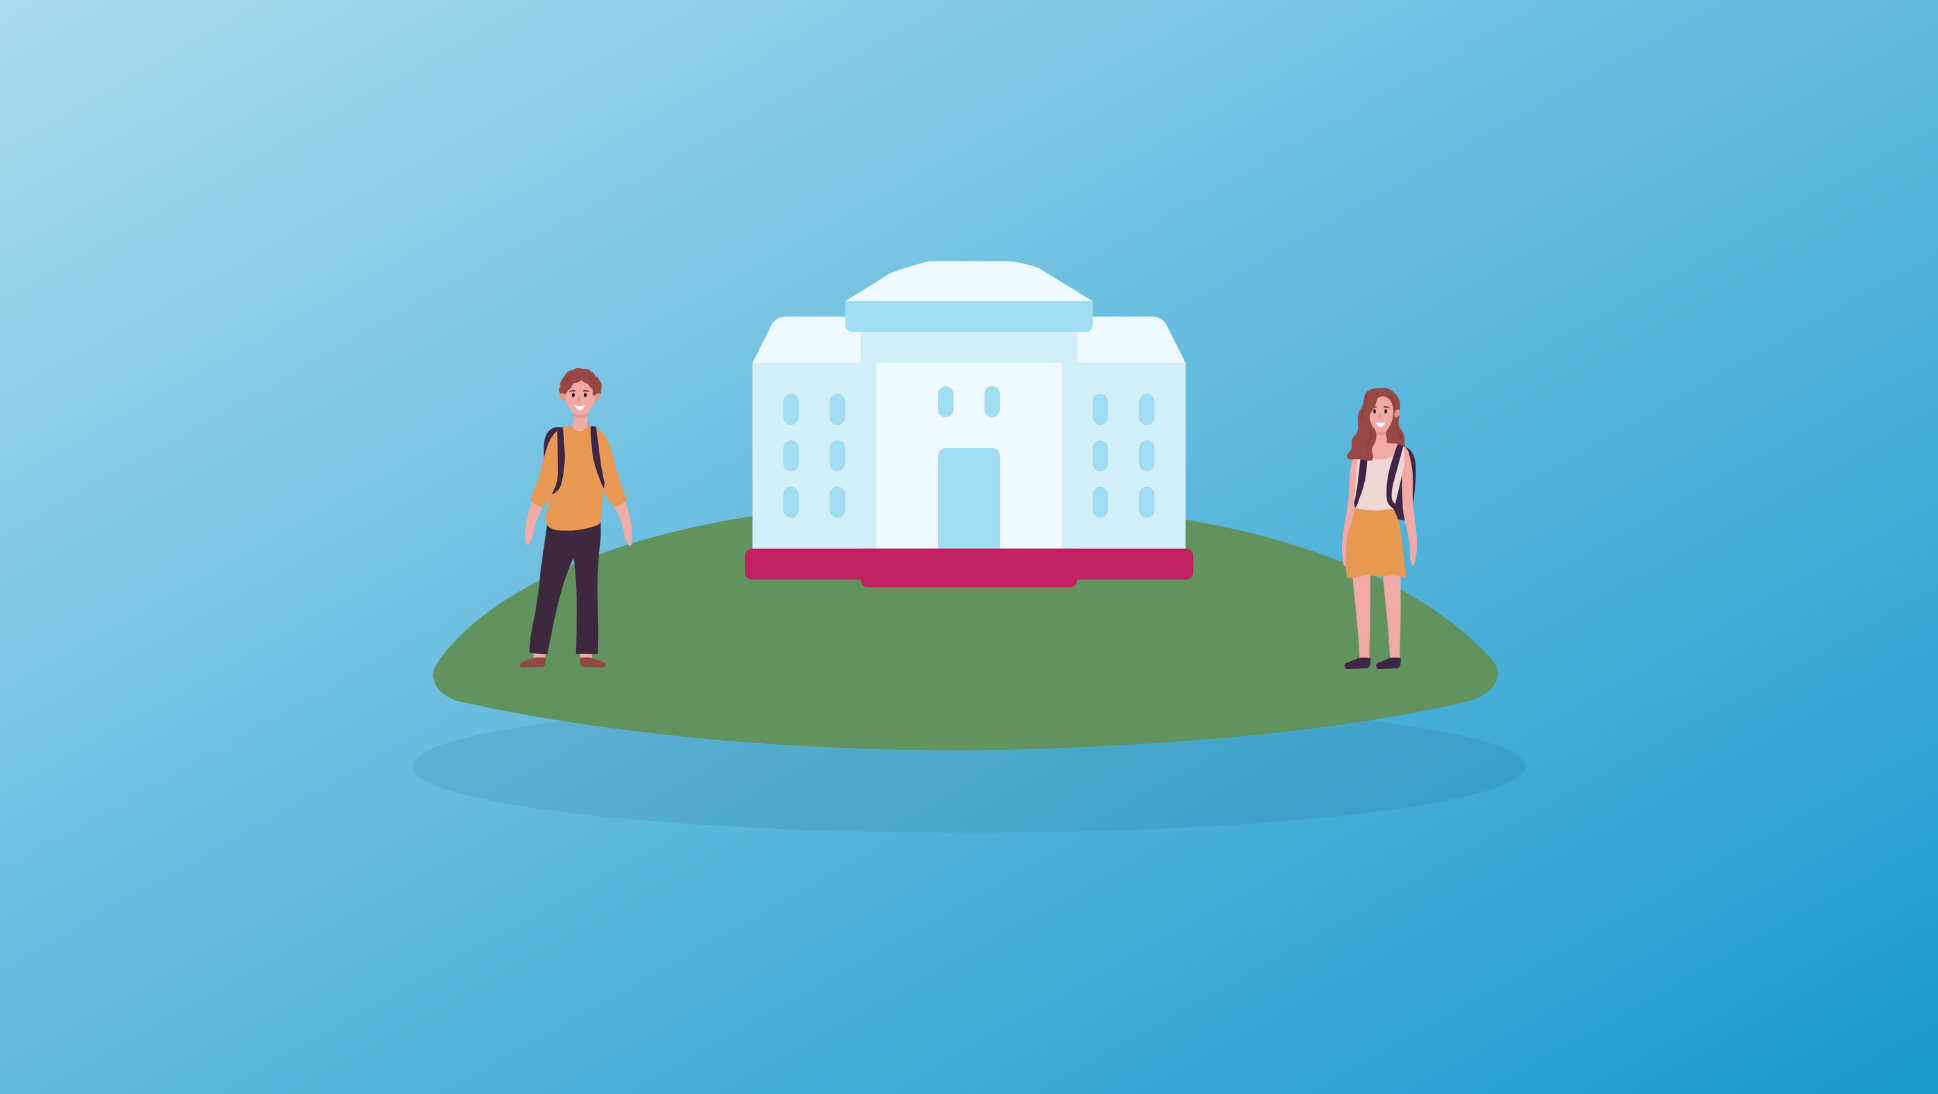 Going on a College Tour? Helpful Prep Tips + College Evaluation Form - illustration of two students standing on either side of a college building on a hill